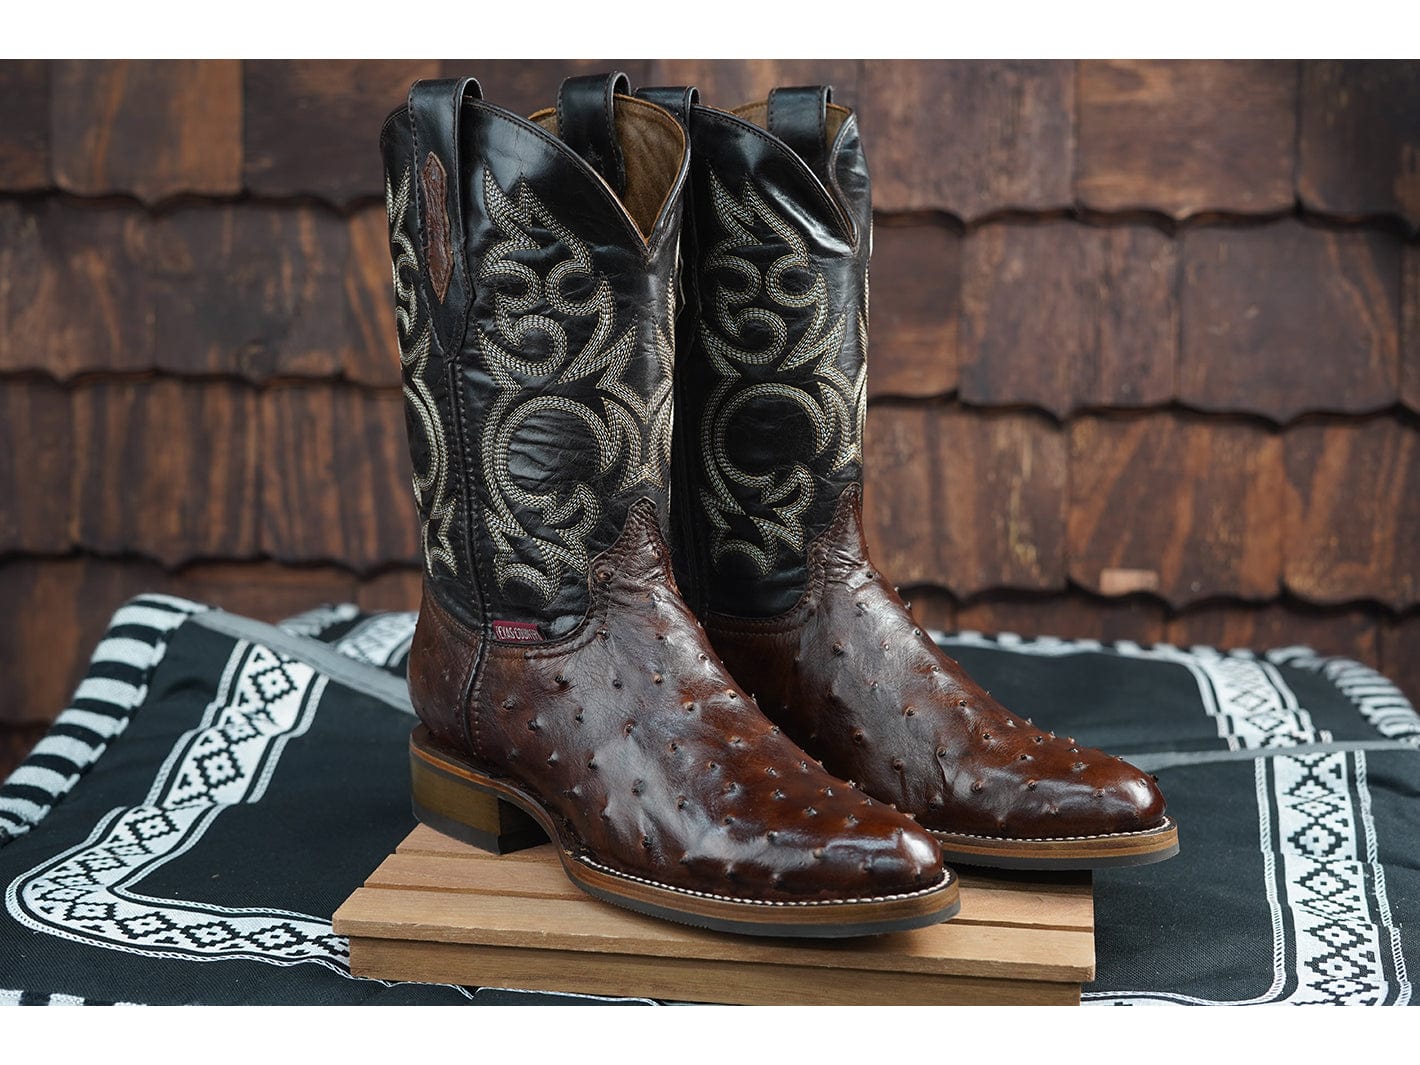 Gomez Western Wear & Texas Country Boots